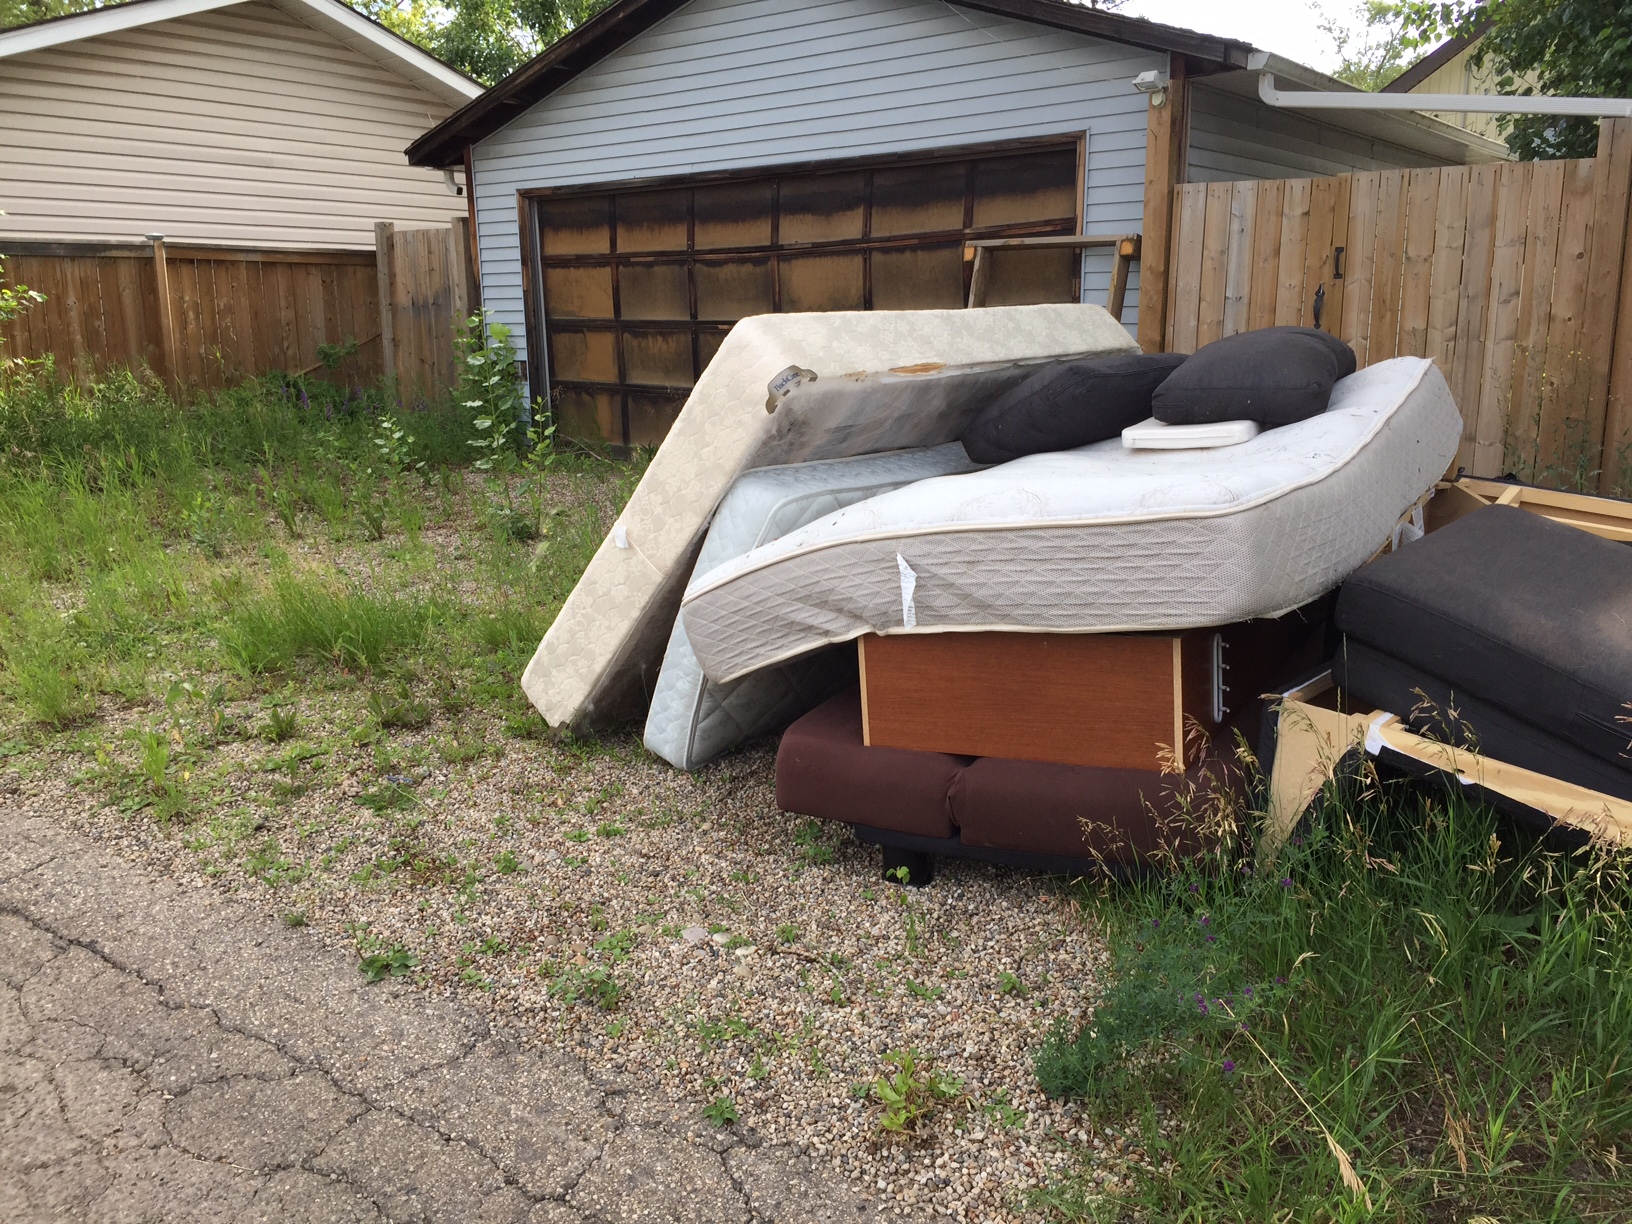 Residential Junk Removal Edmonton And Alberta Wide Junk 4 Good